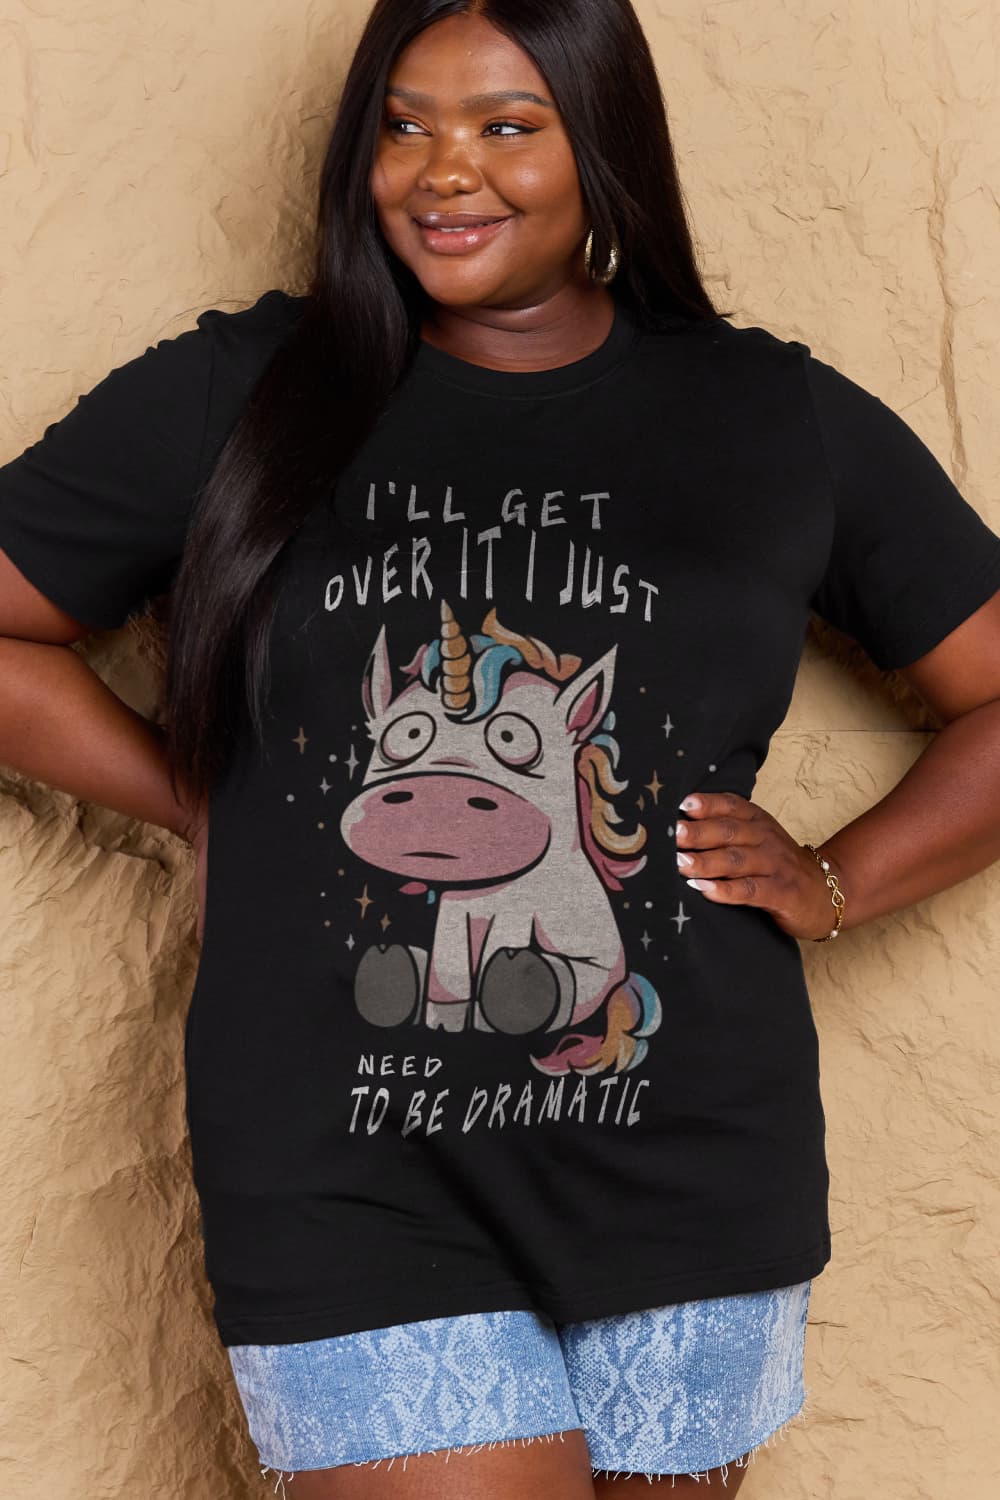 Full Size I’LL GET OVER IT I JUST NEED TO BE DRAMATIC Graphic Cotton Tee - T-Shirts - Shirts & Tops - 5 - 2024